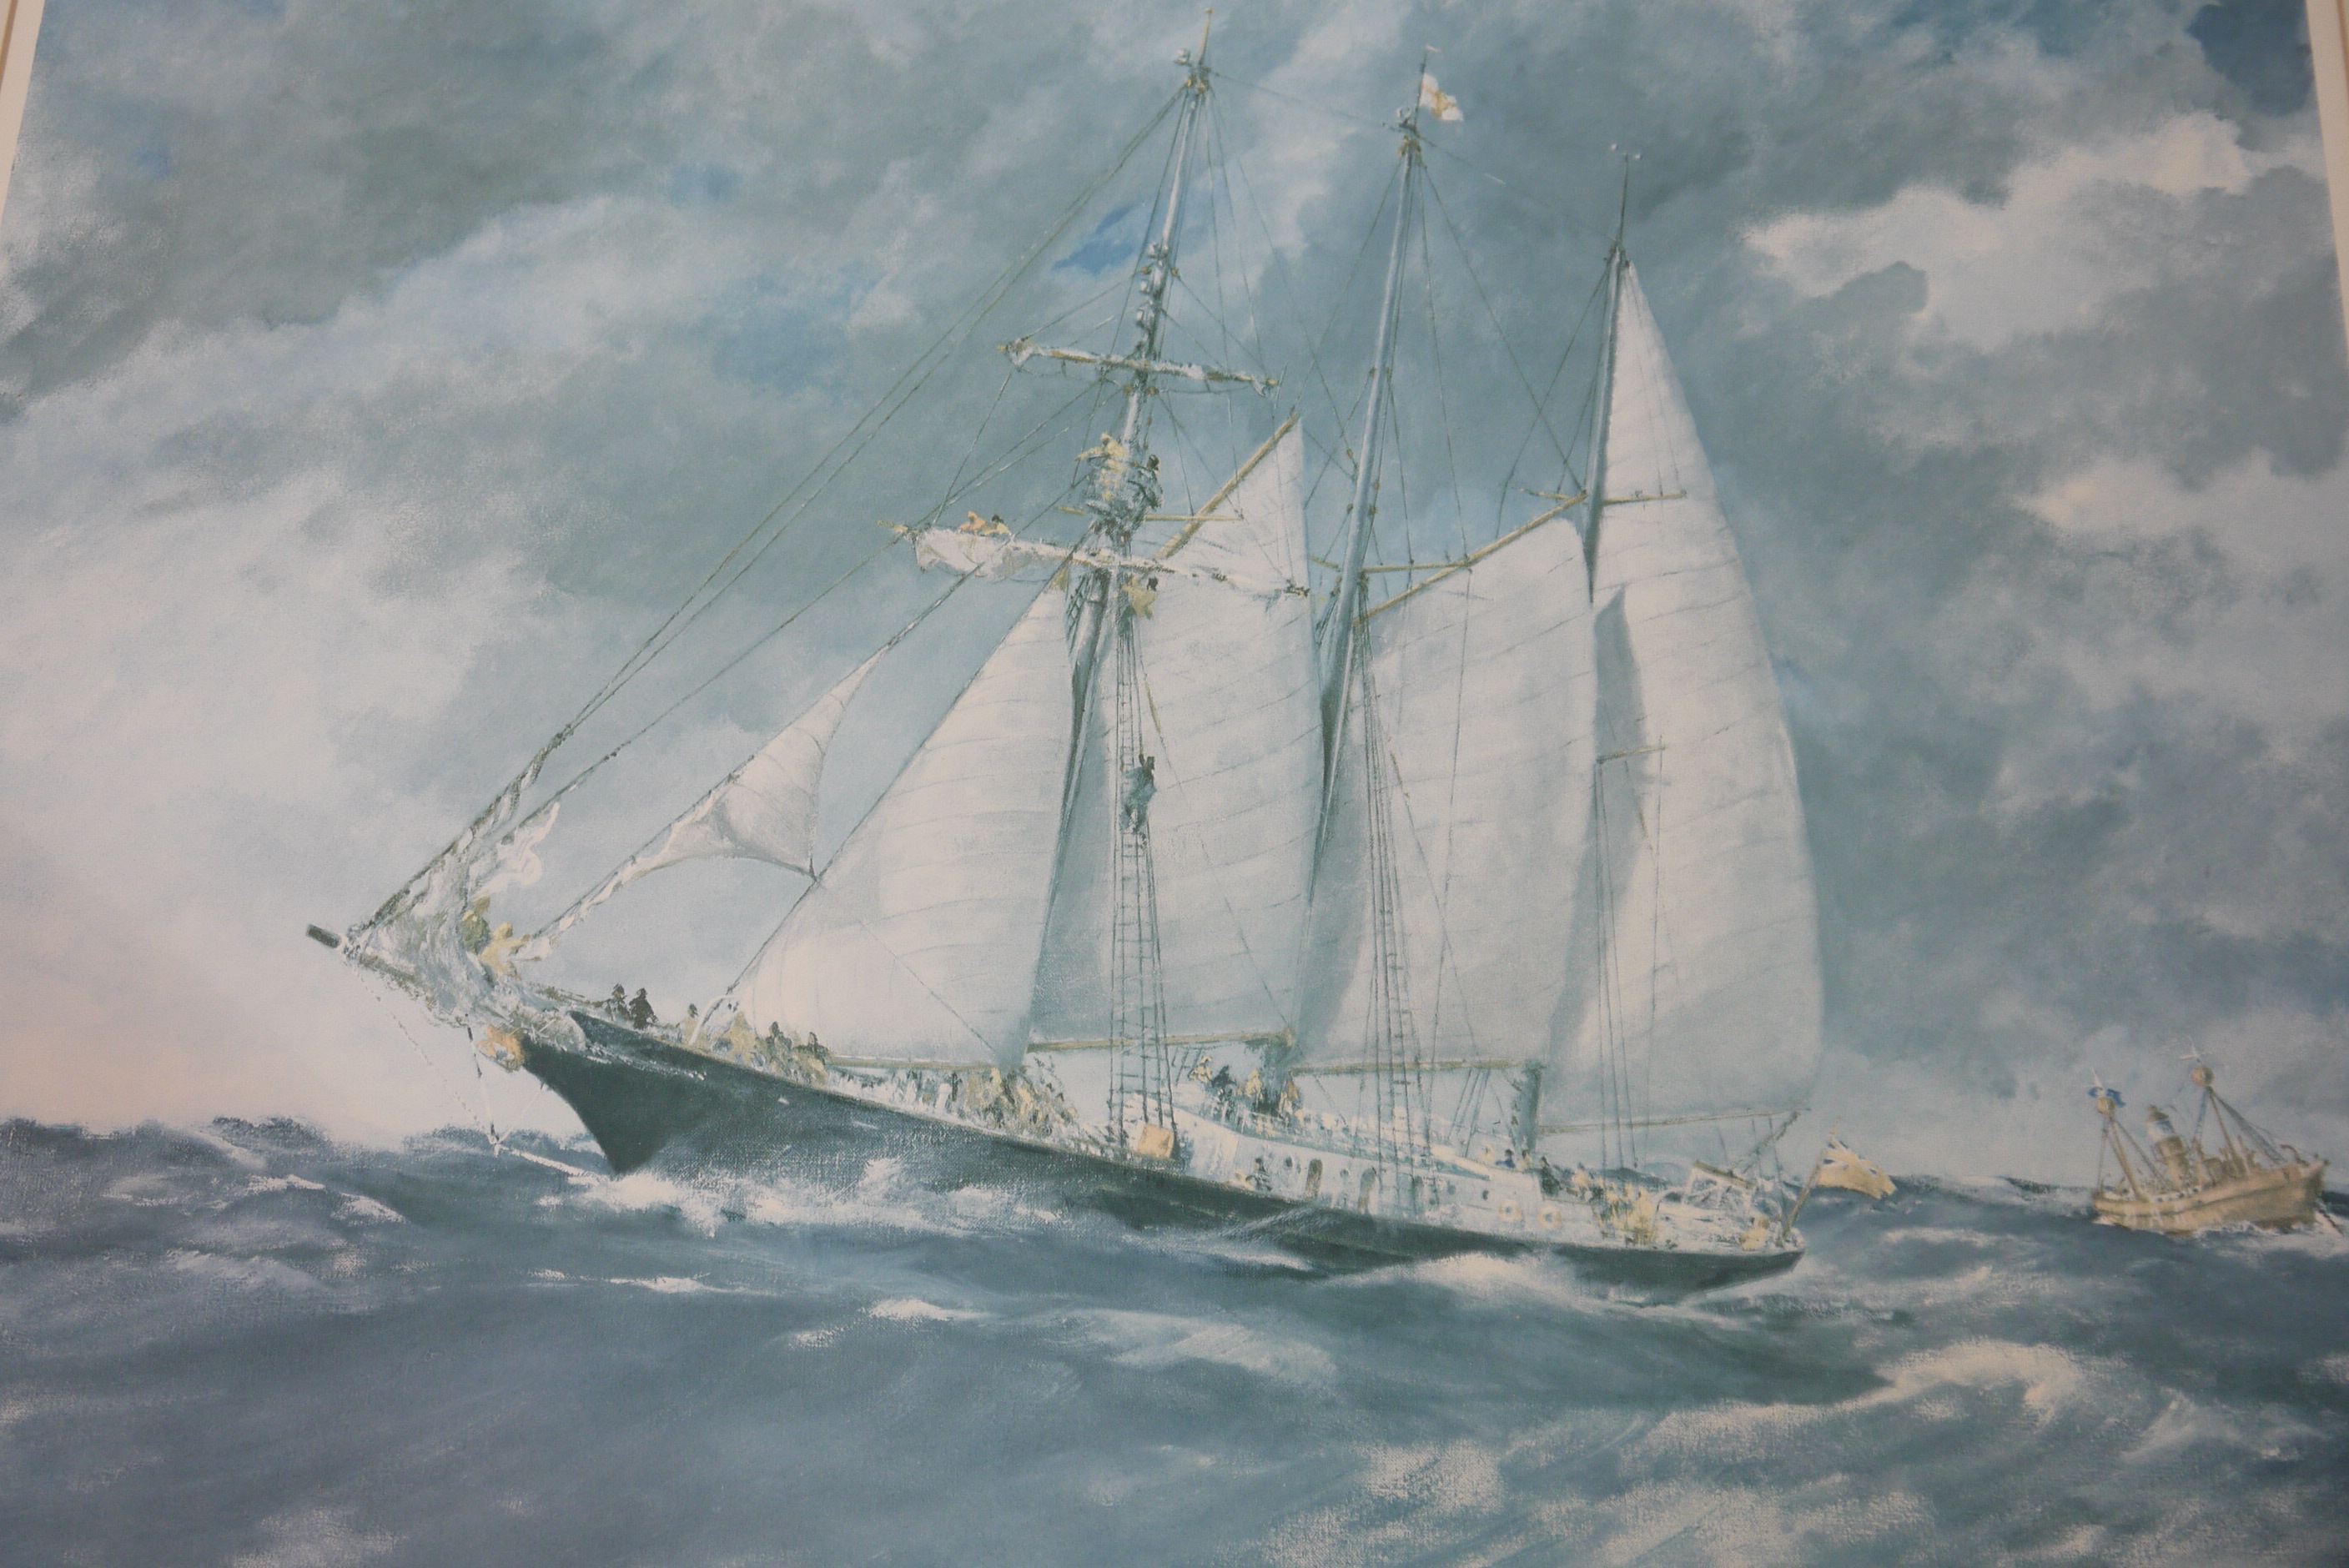 By and After Francis Russell Flint a double masted yacht in a heavy swell, colour print,